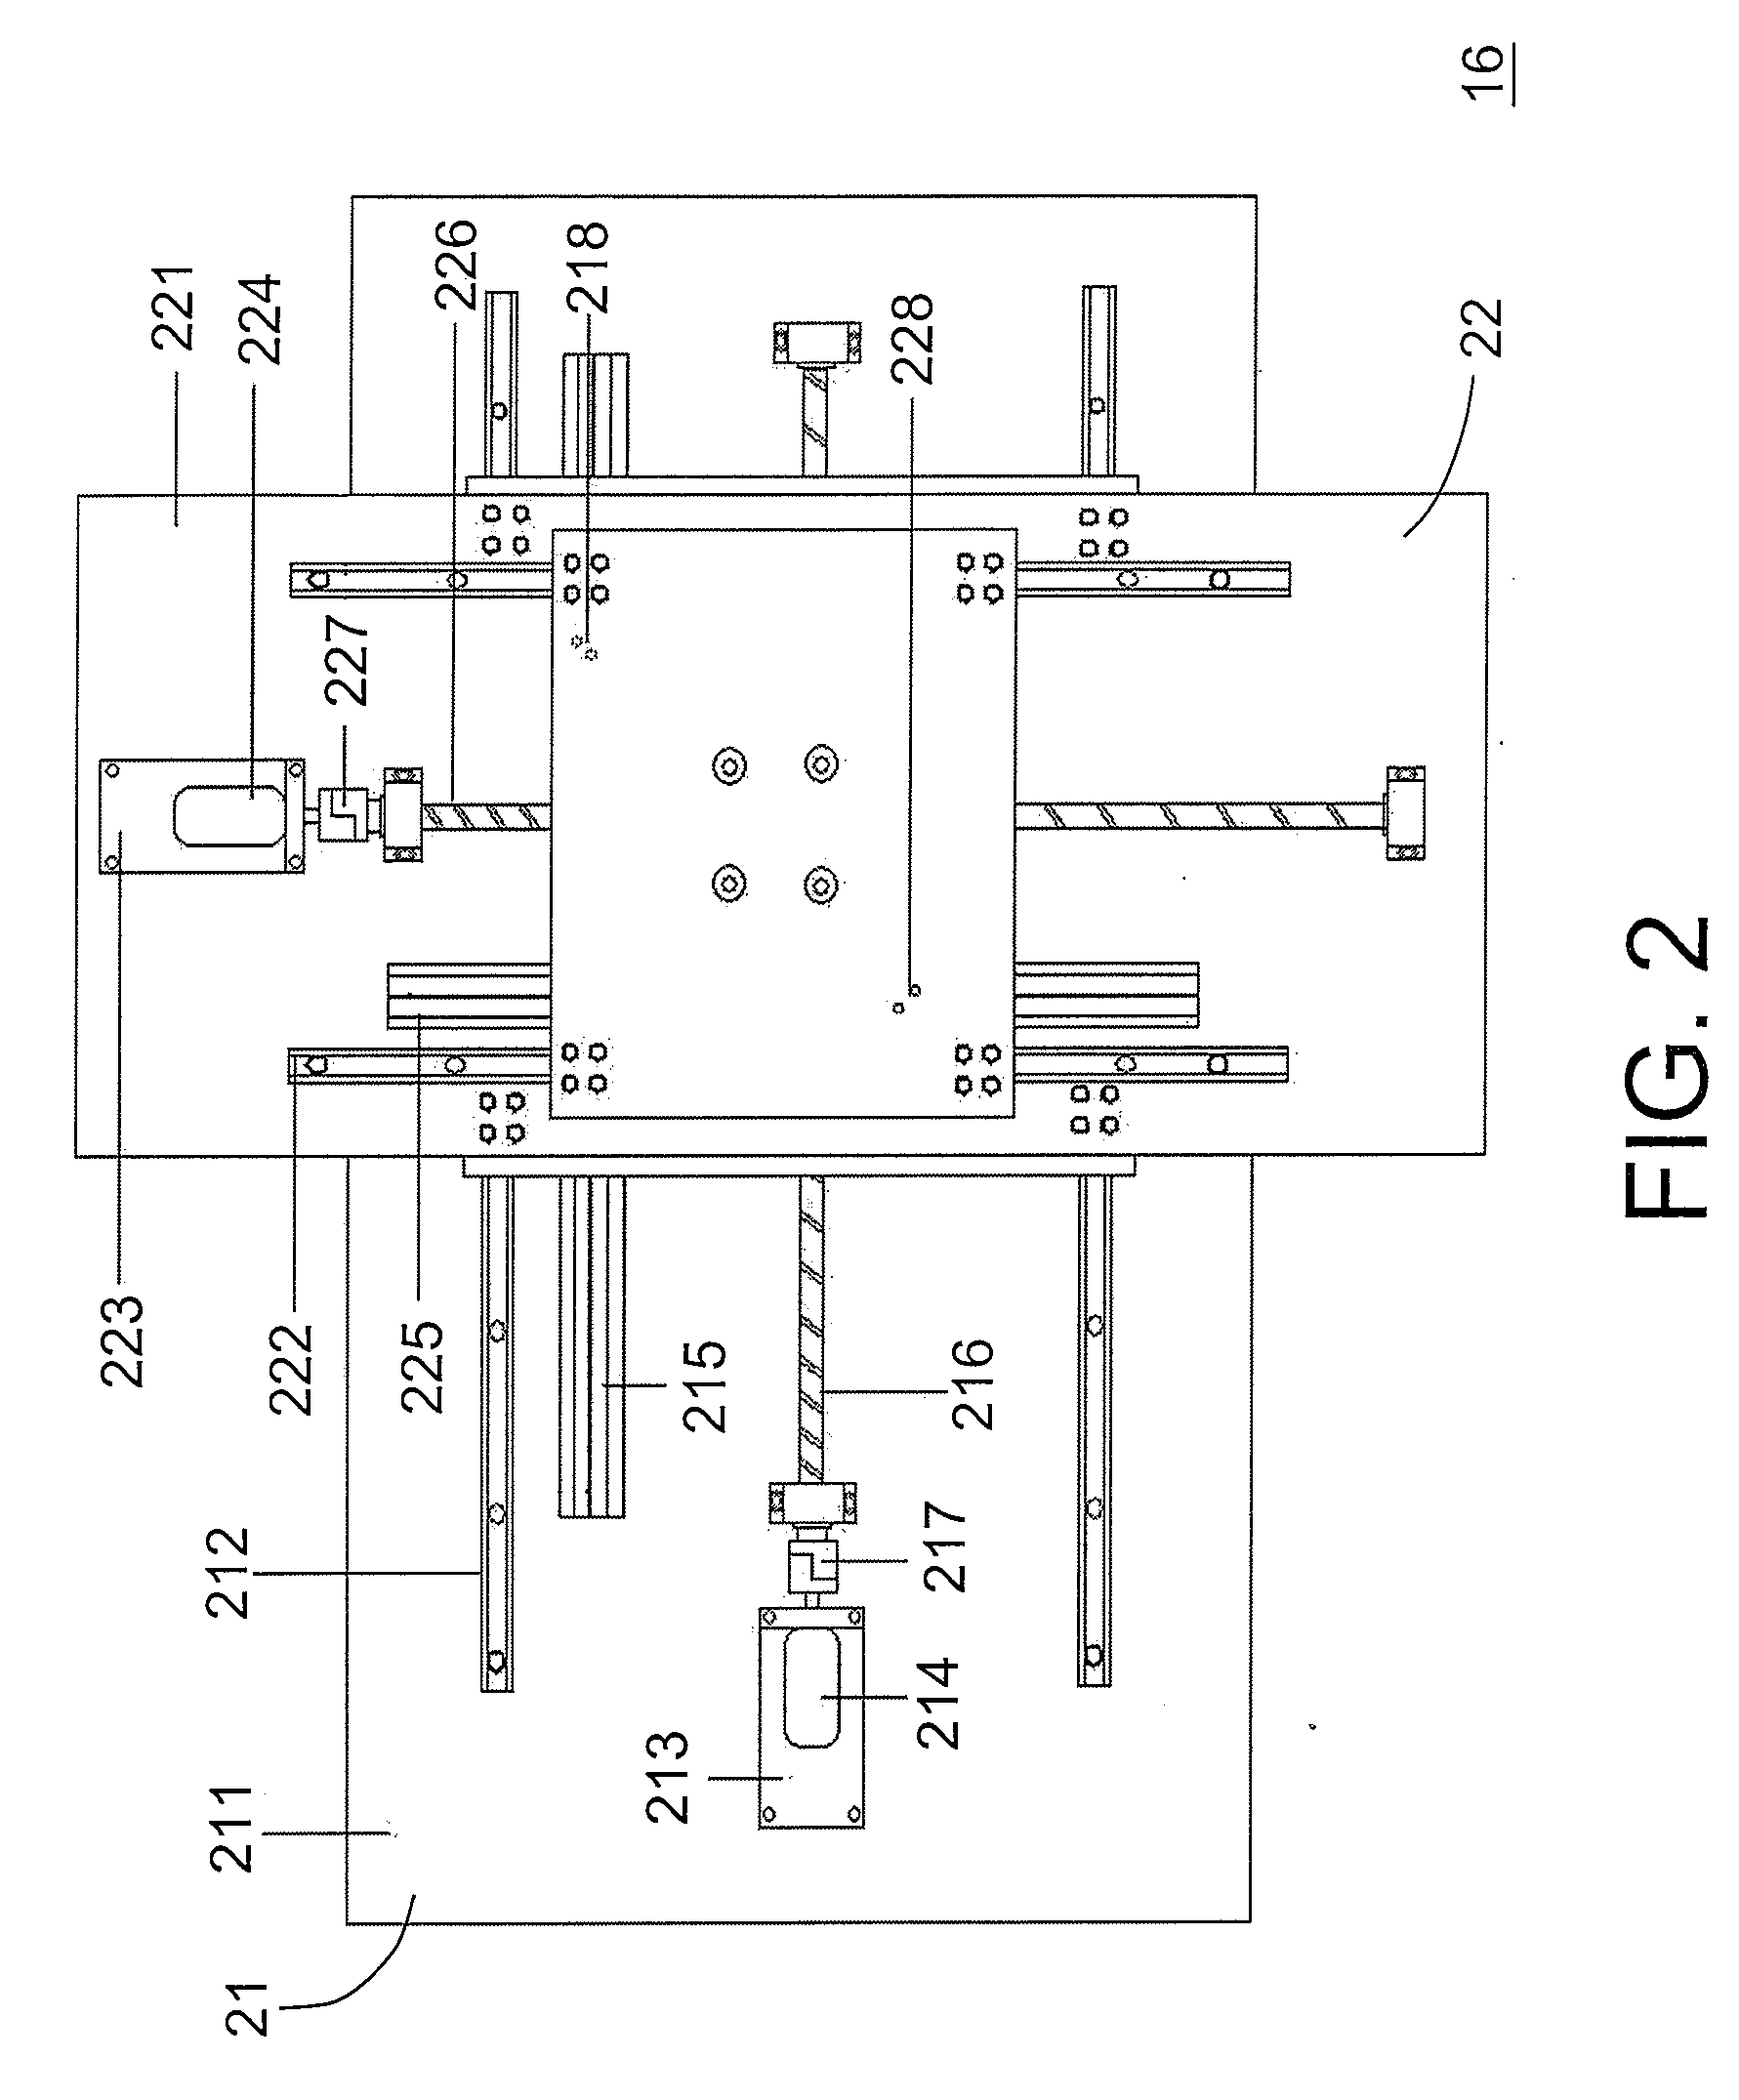 Control method combining fuzzy logic control with sliding mode control for ideal dynamic responses